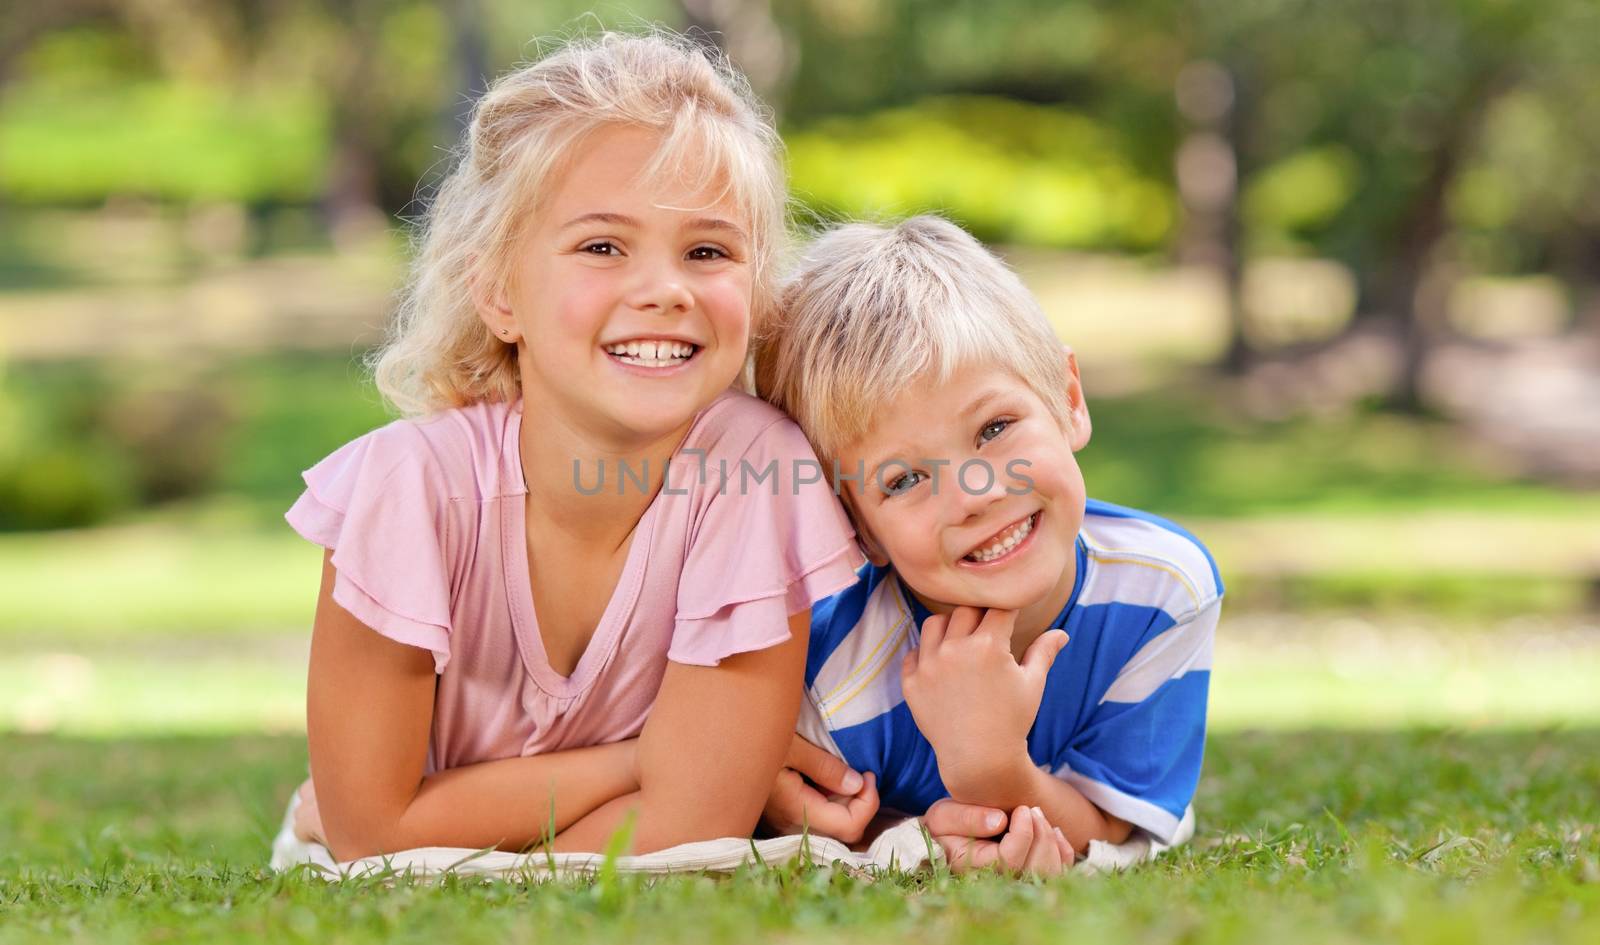 Boy with his sister in the park during the summer